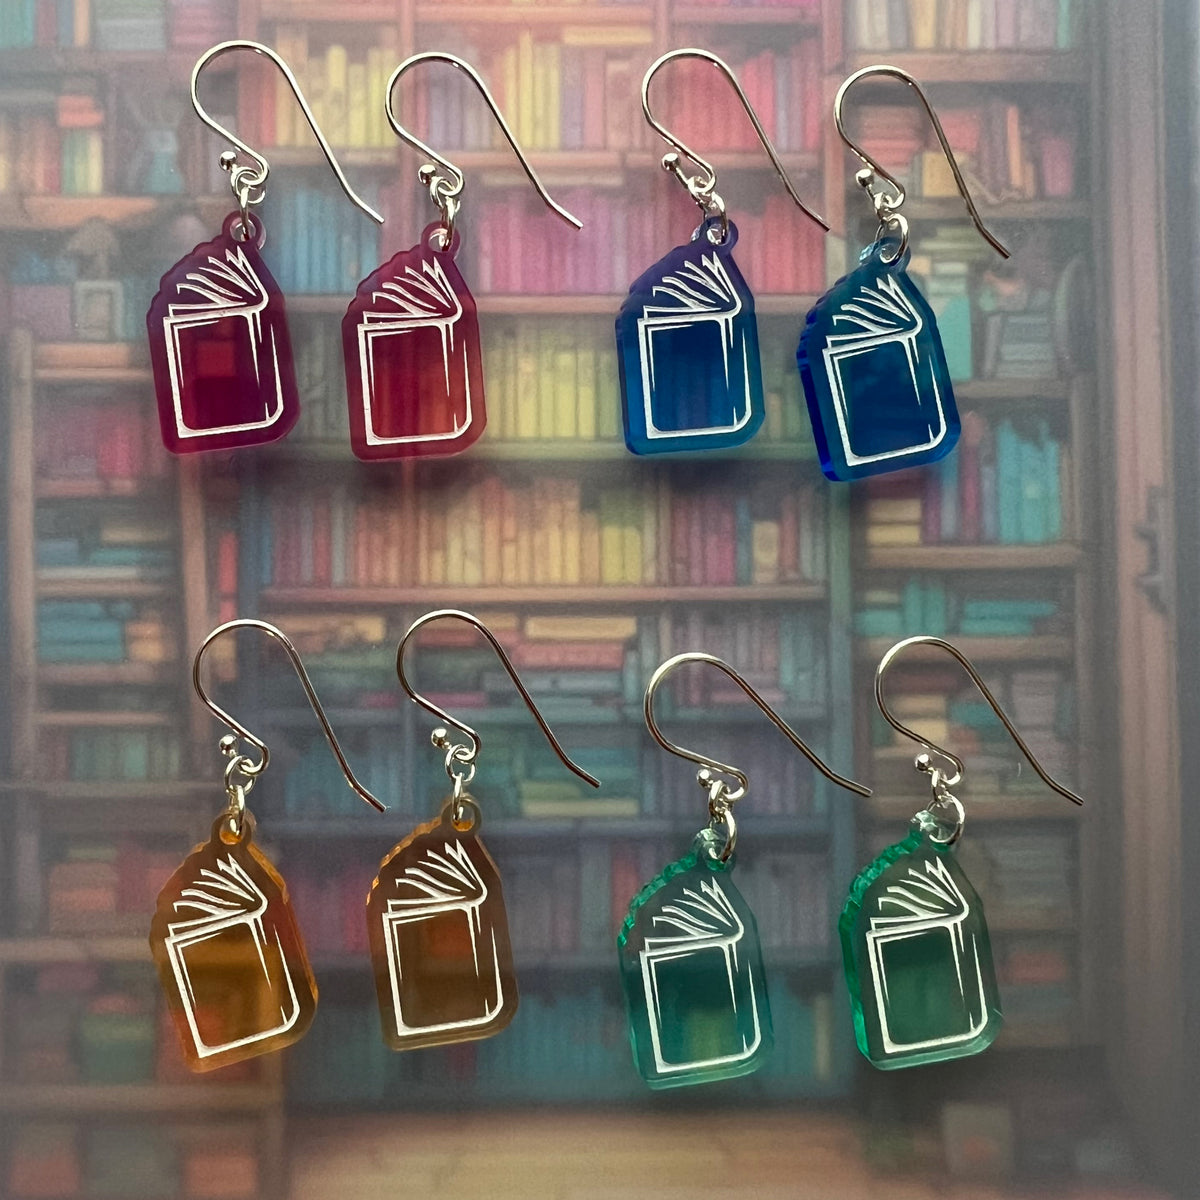 Simple Book Earrings for all book nerds